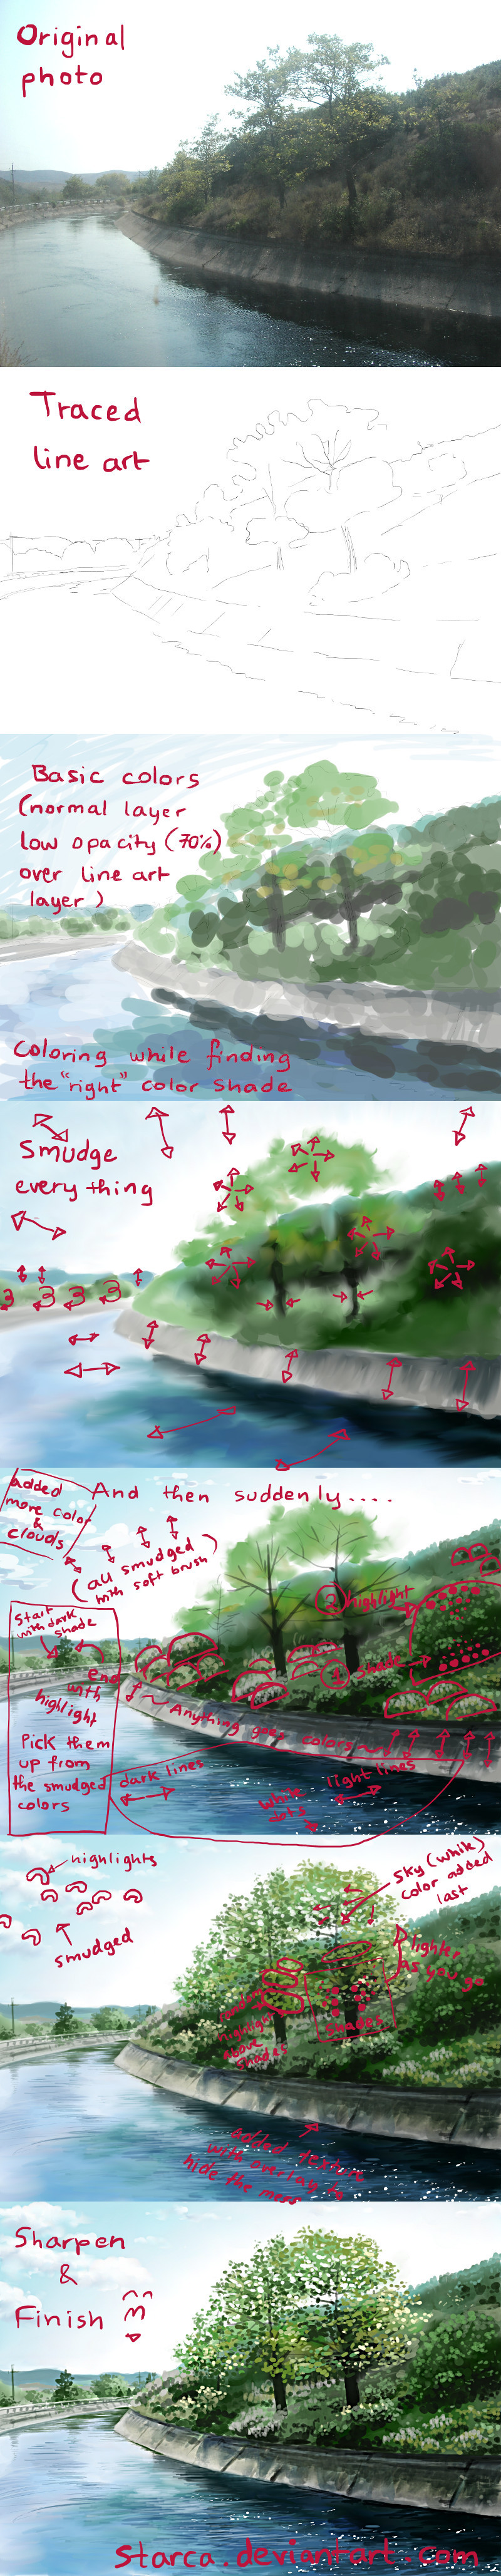 Tutorial: anime like scenery from photo by starca on DeviantArt